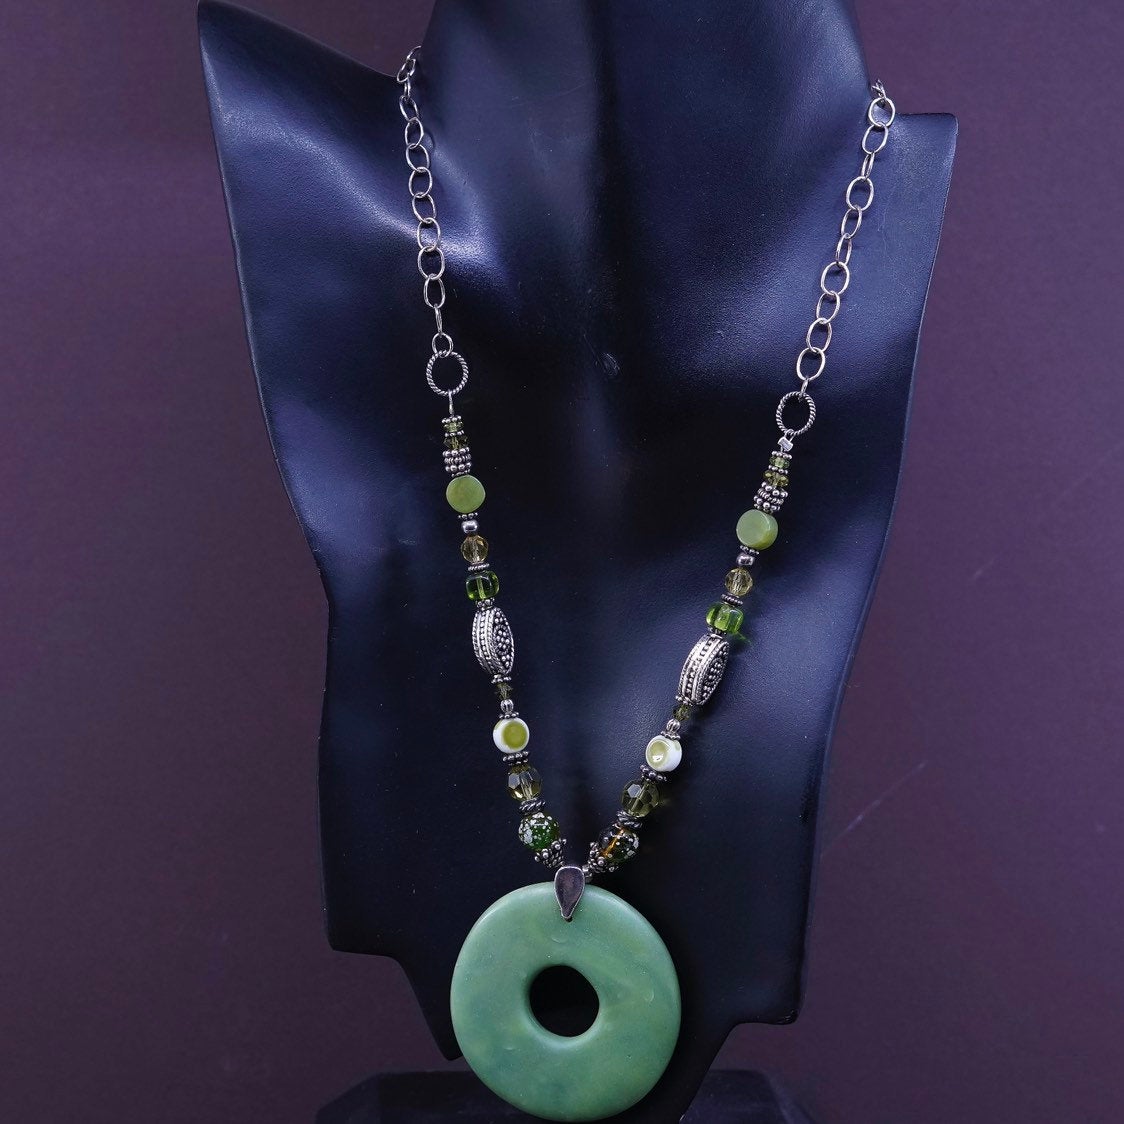 18", Sterling silver beads necklace, circle chain w/ green beads N jade pendant